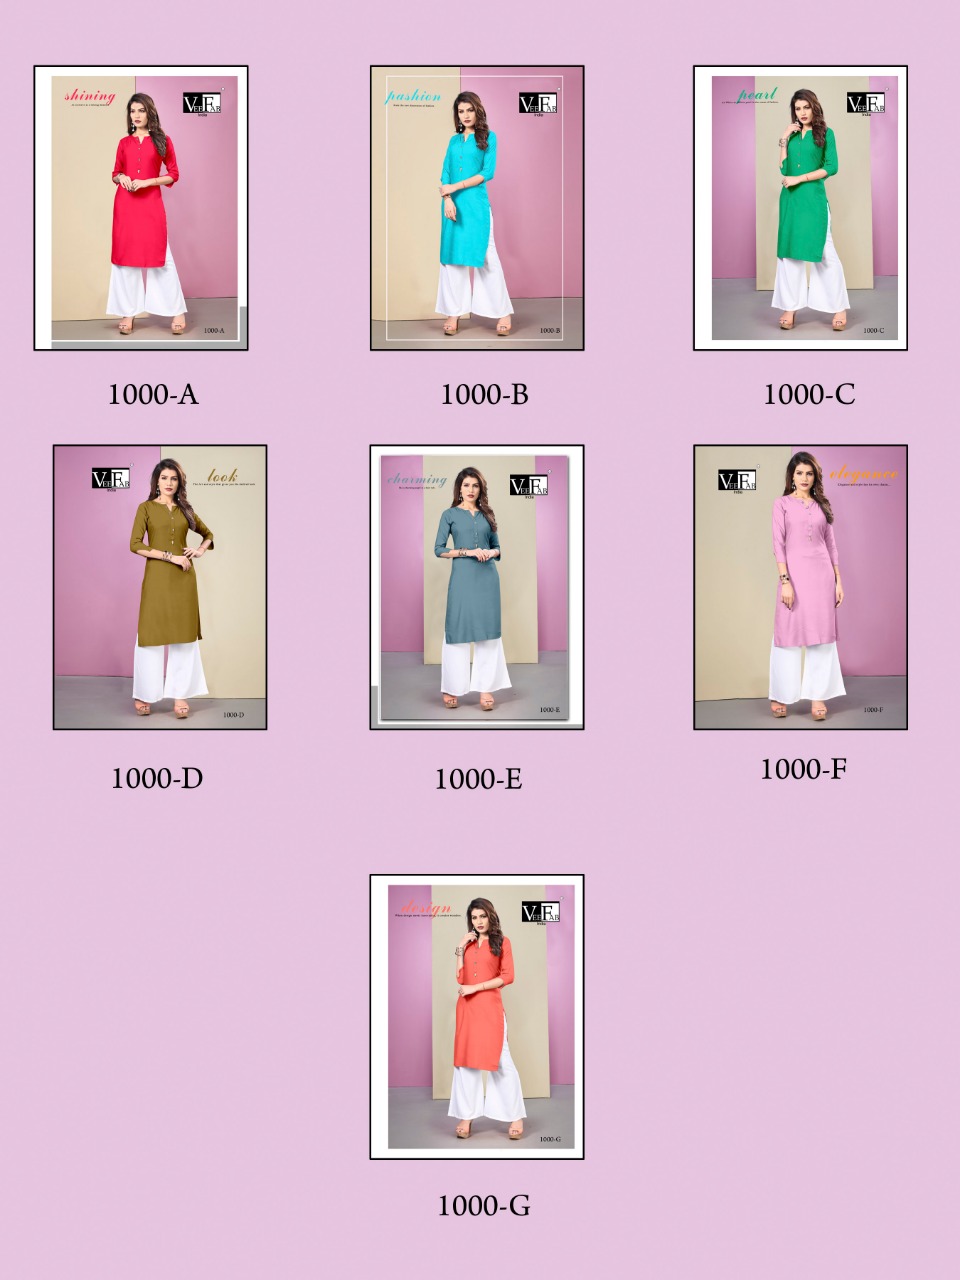 Vee fab colour kit fancy casual wear kurties with plazzo collection